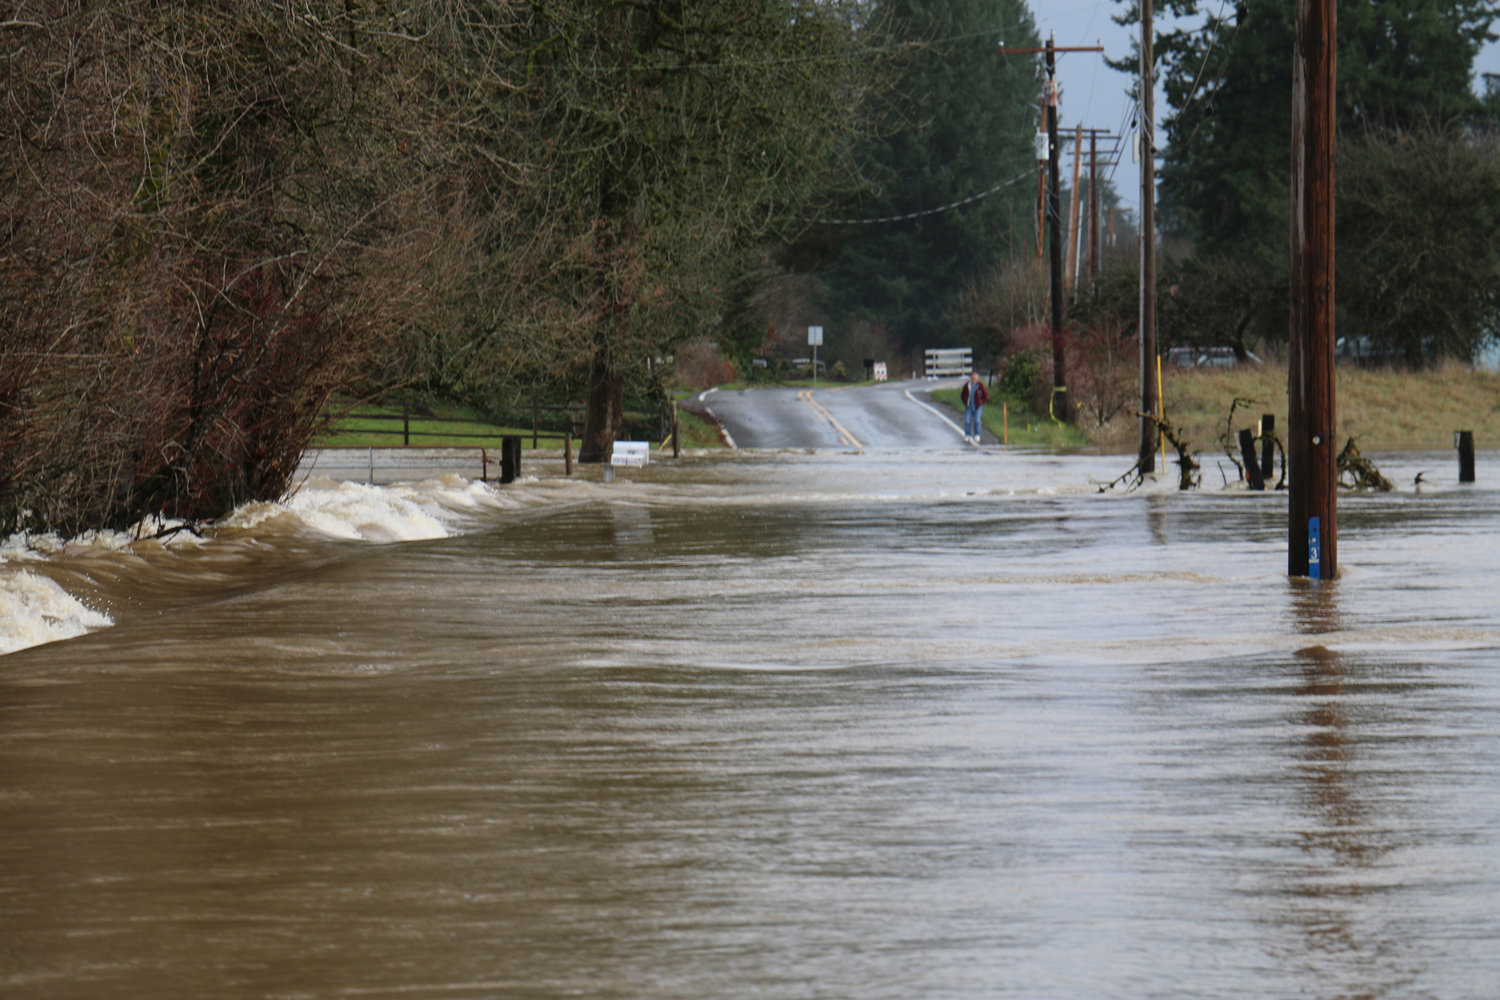 A person looks at the fast moving water that swept over Independence Road in this file photo.